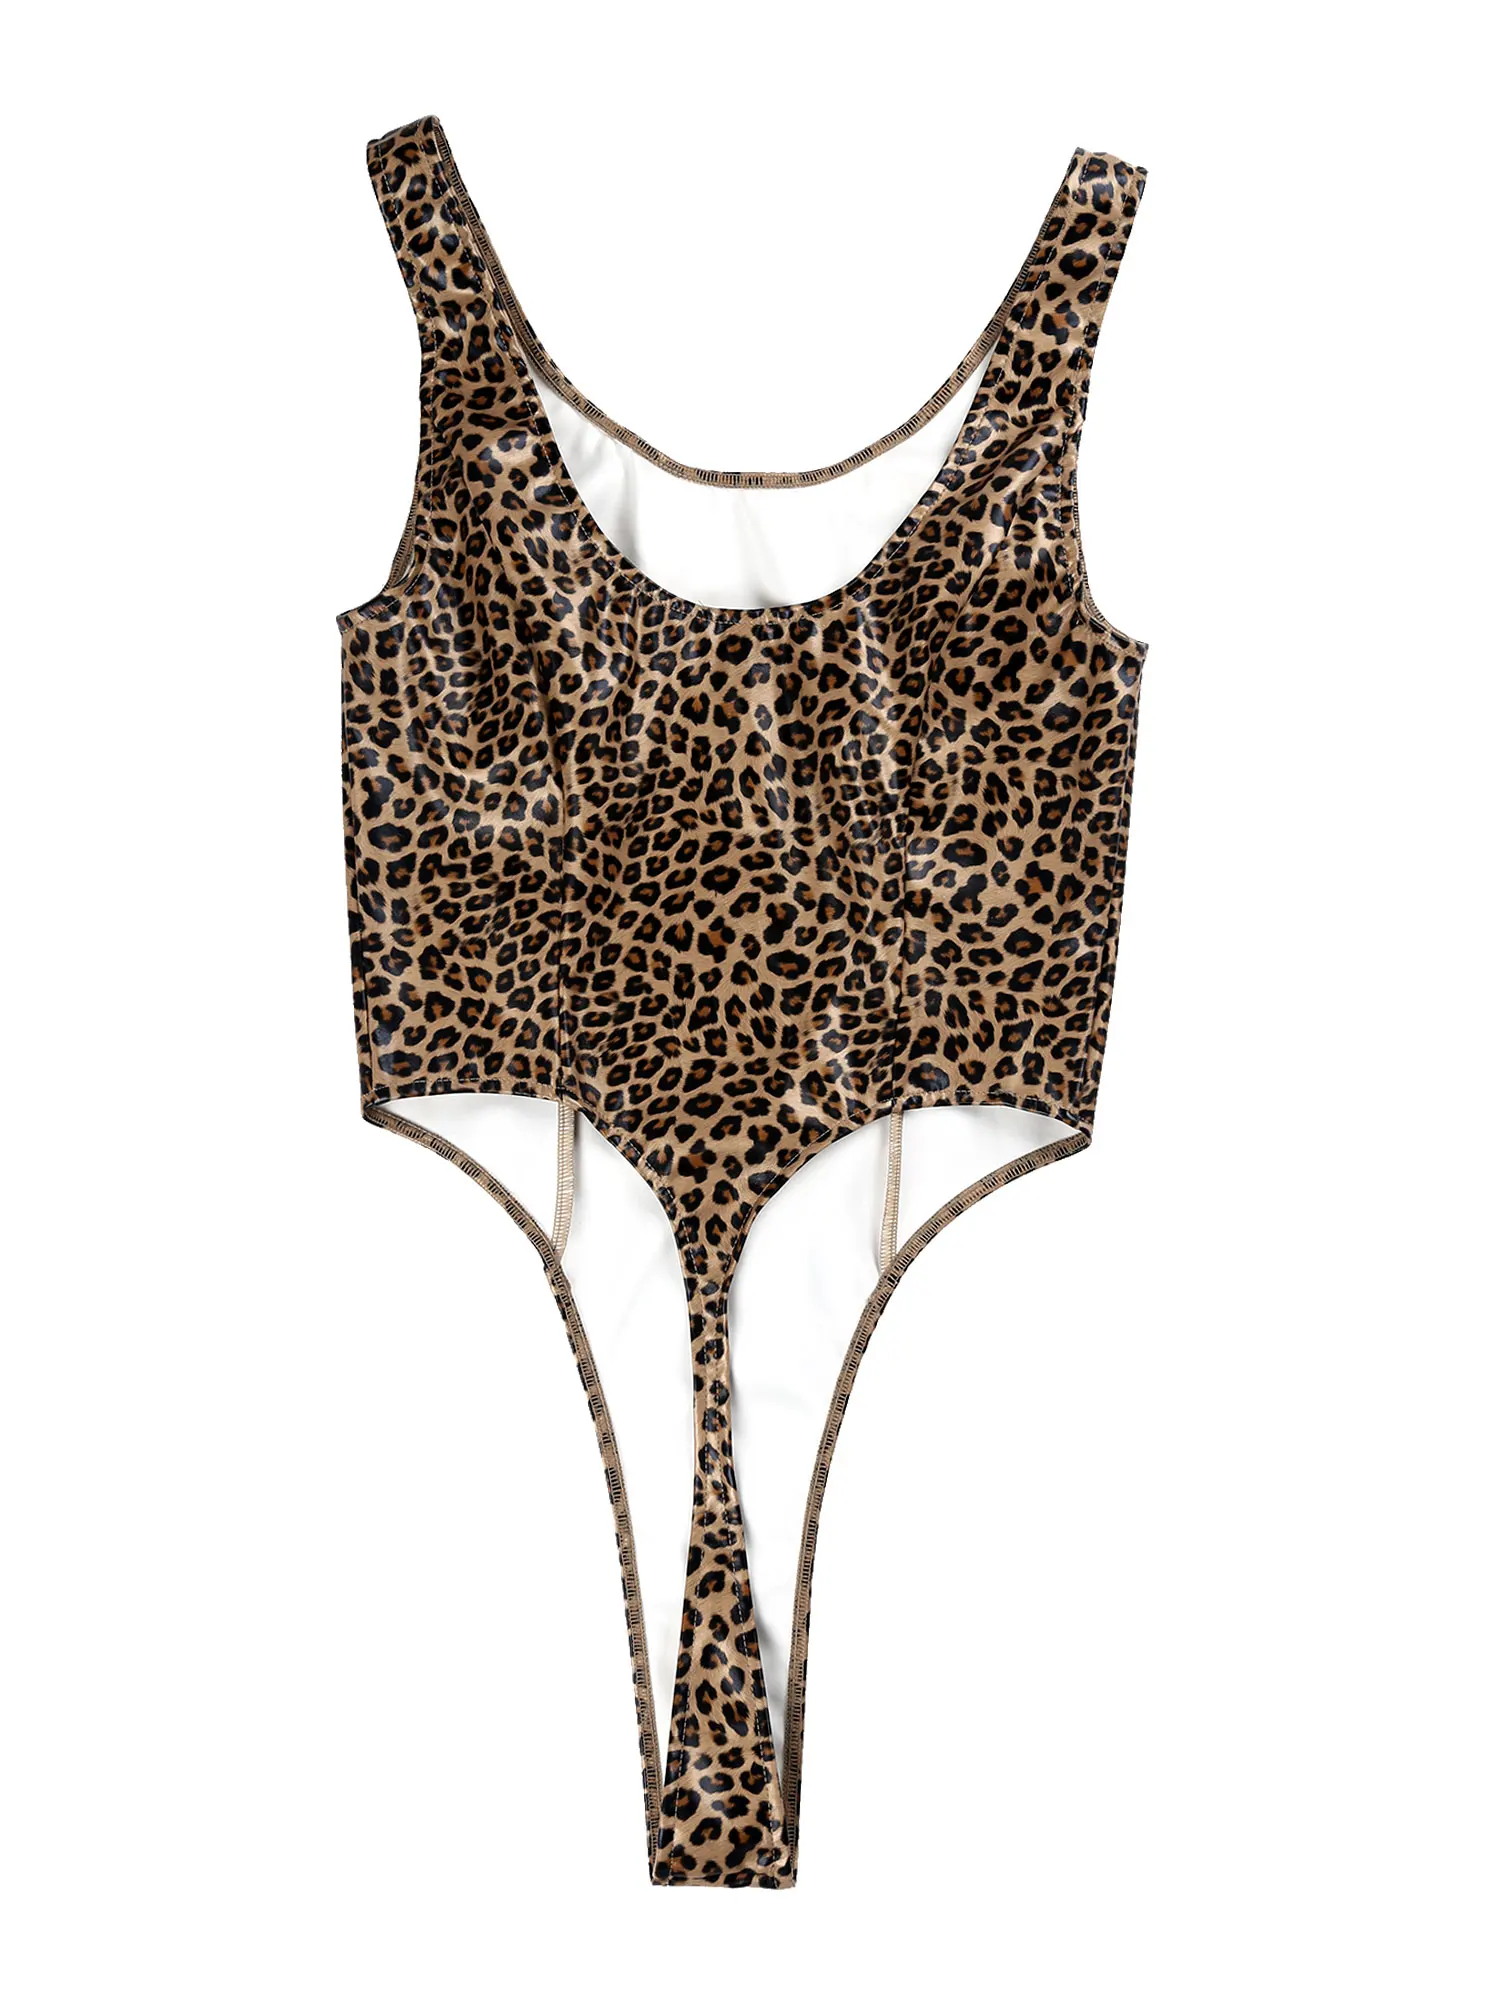 Out to hunt - Shiny Leopard Bodysuit / Swimsuit